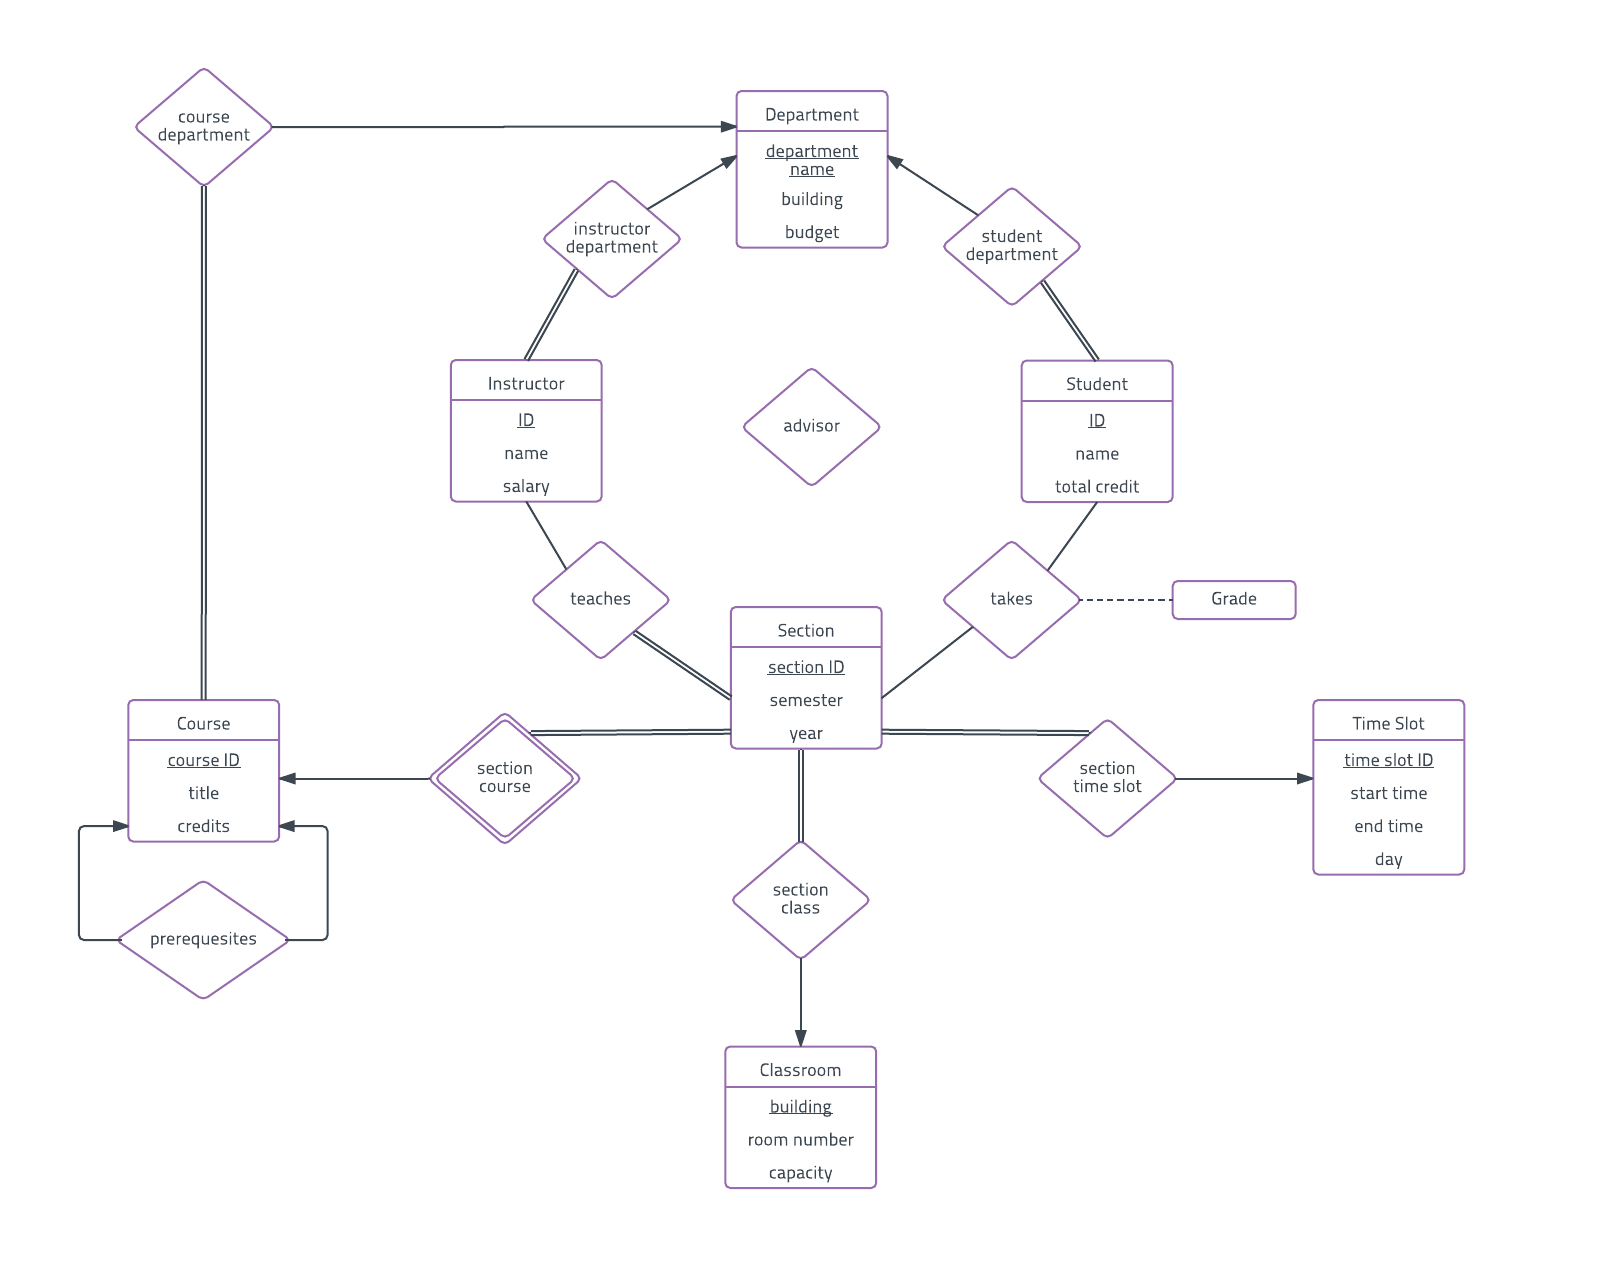 Er Diagram Examples And Templates | Lucidchart throughout Er Diagram Examples With Problem Statement